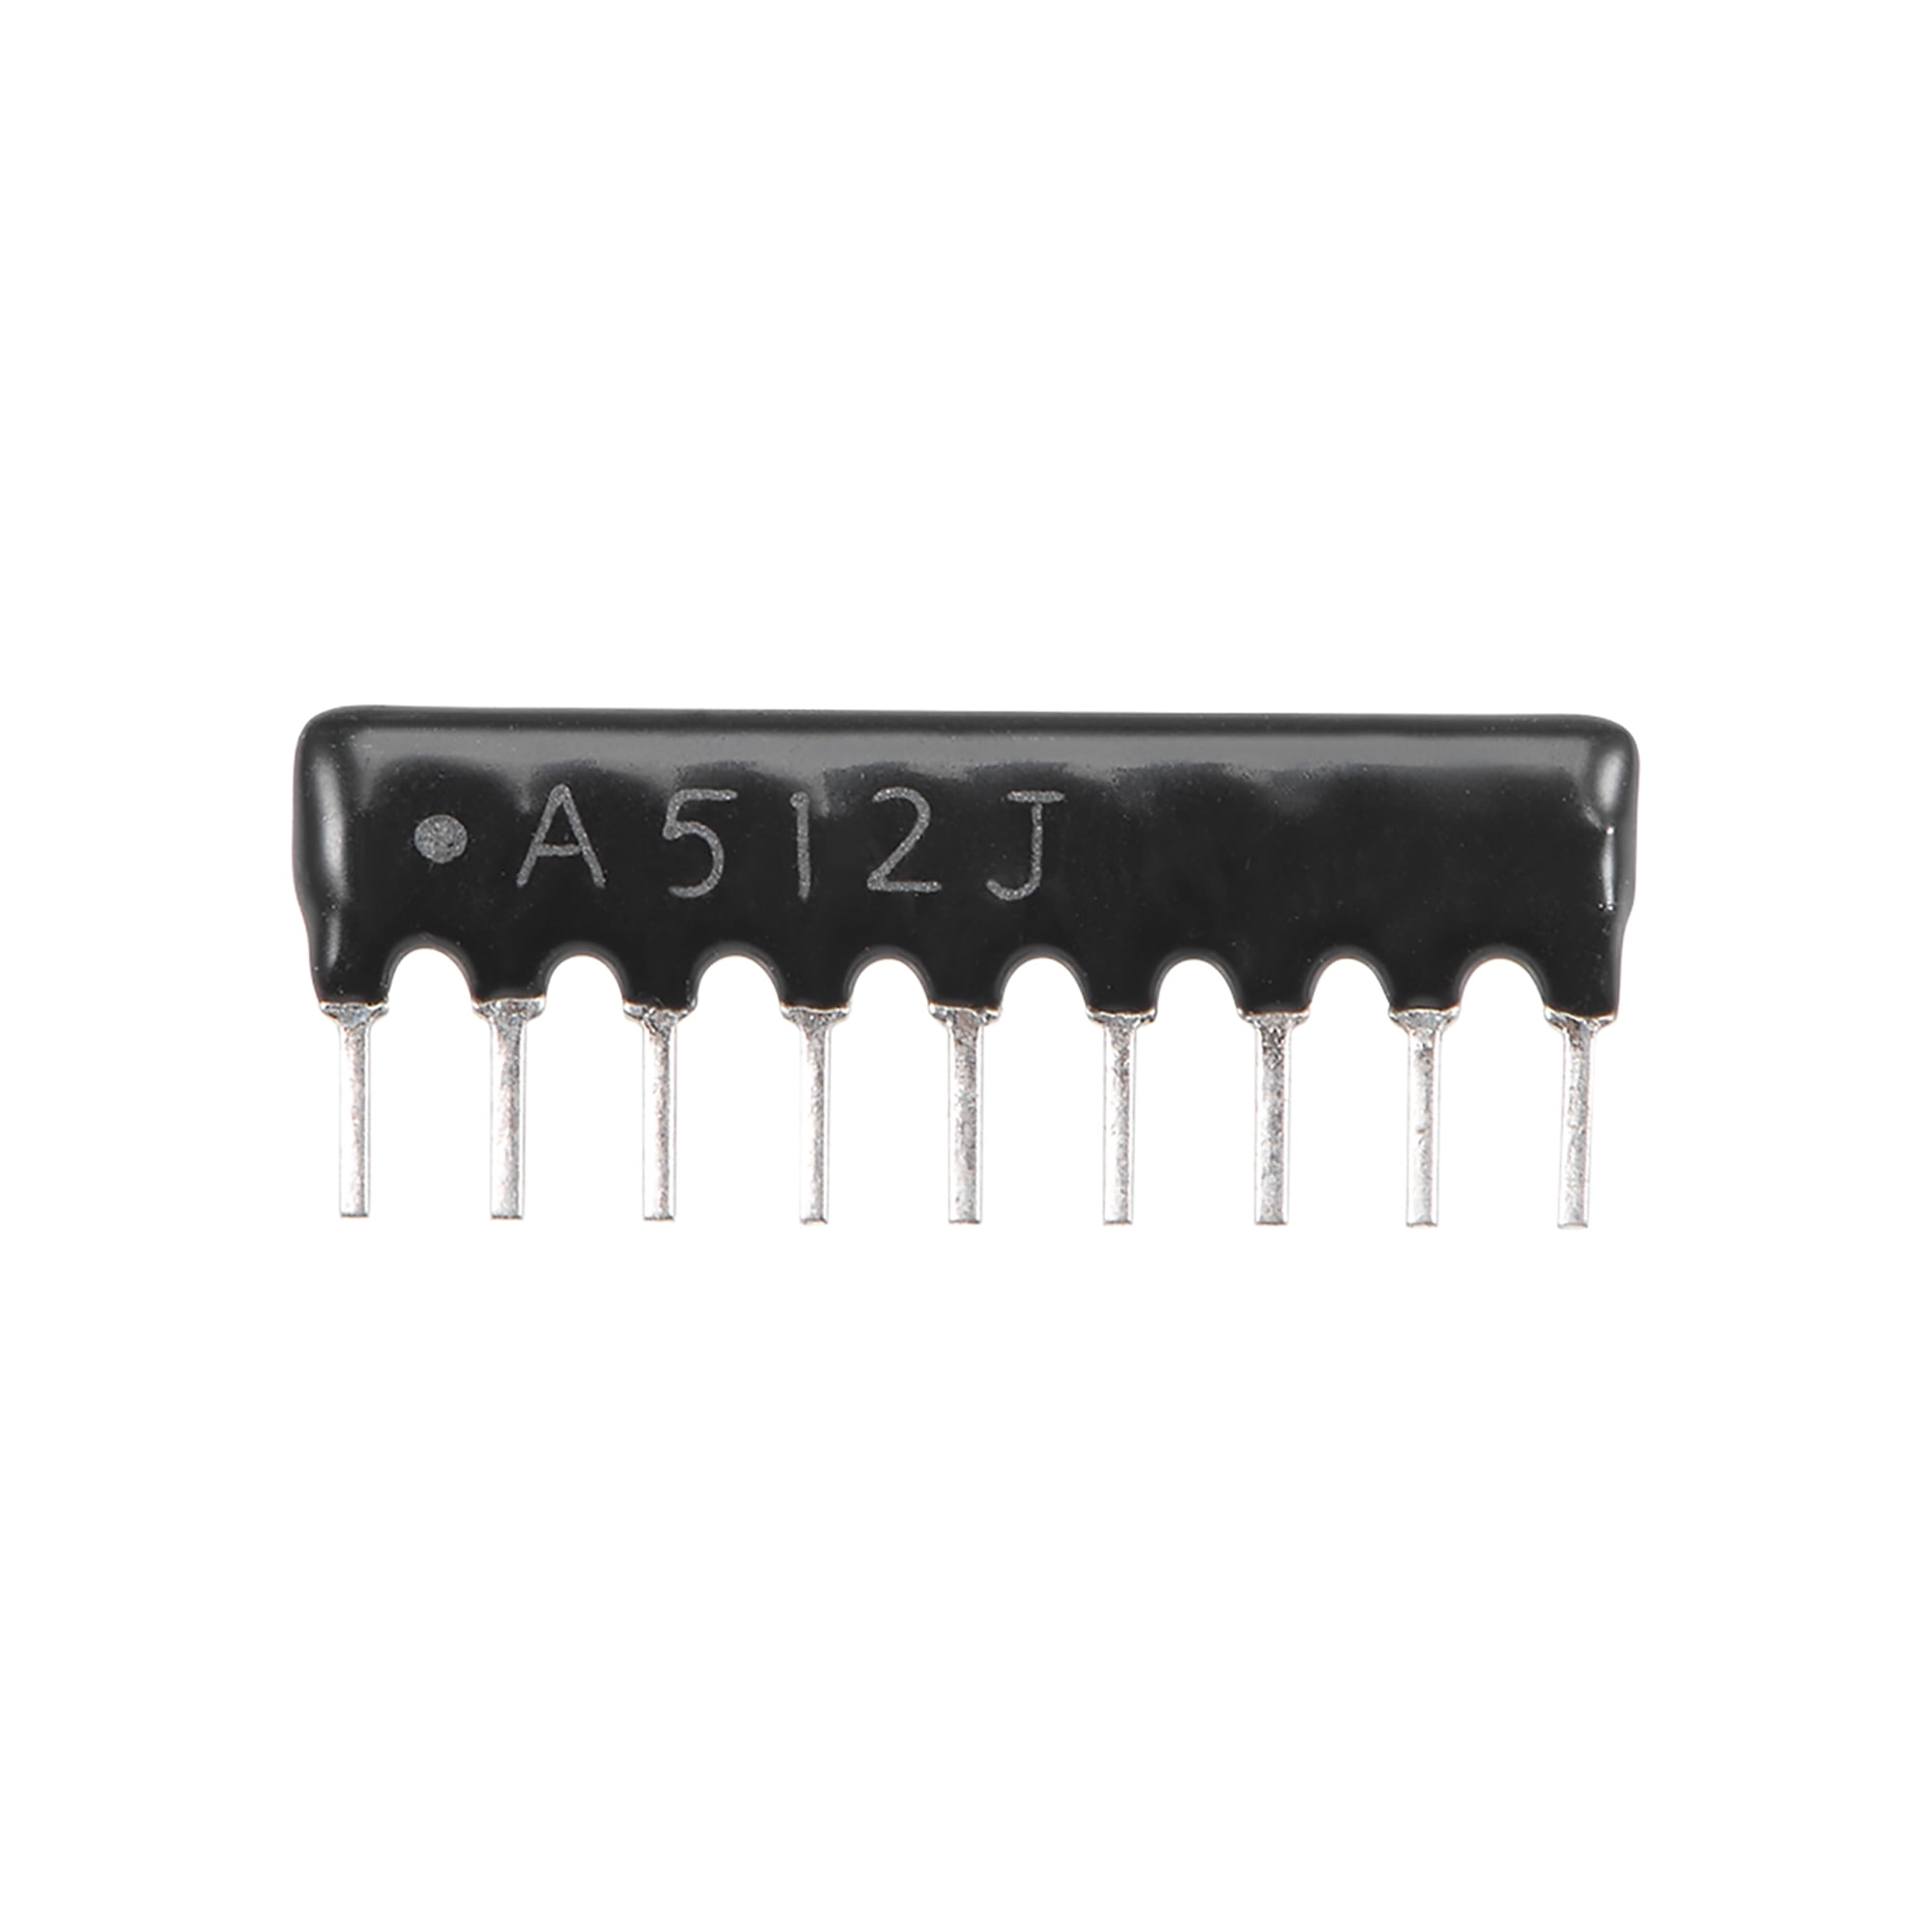 Subdivide Missing Understand 470 Ohm Resistor Network, 1/8W SIP-9 Array 2.54mm Pitch Bussed Type 5%  Tolerance 10pcs - Walmart.com